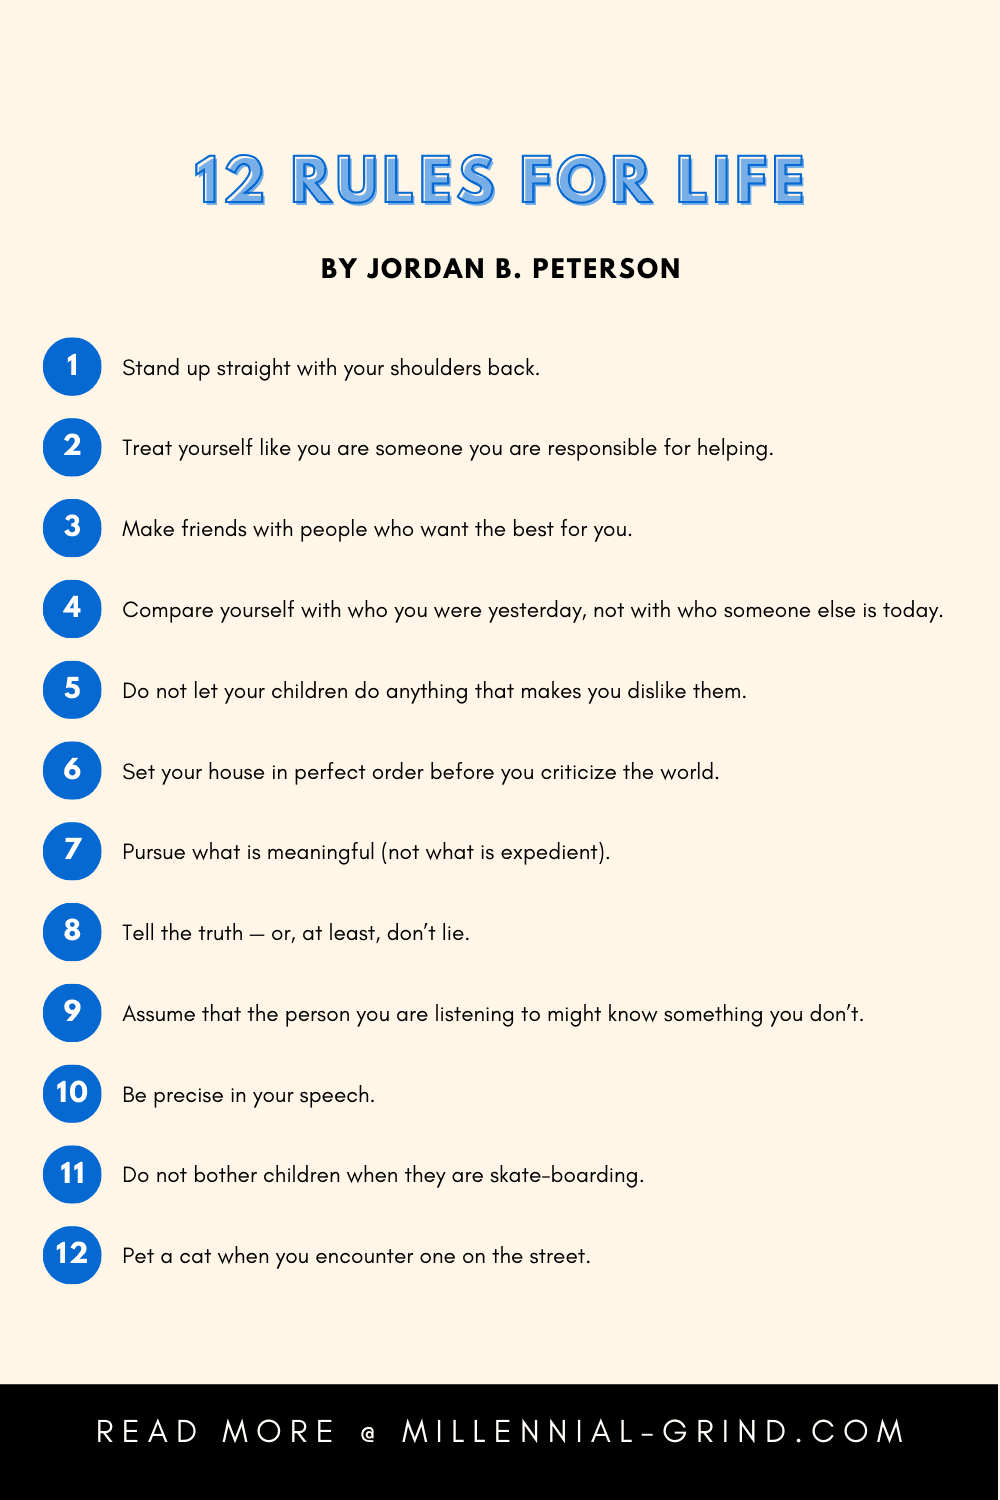 12 Rules For Life List